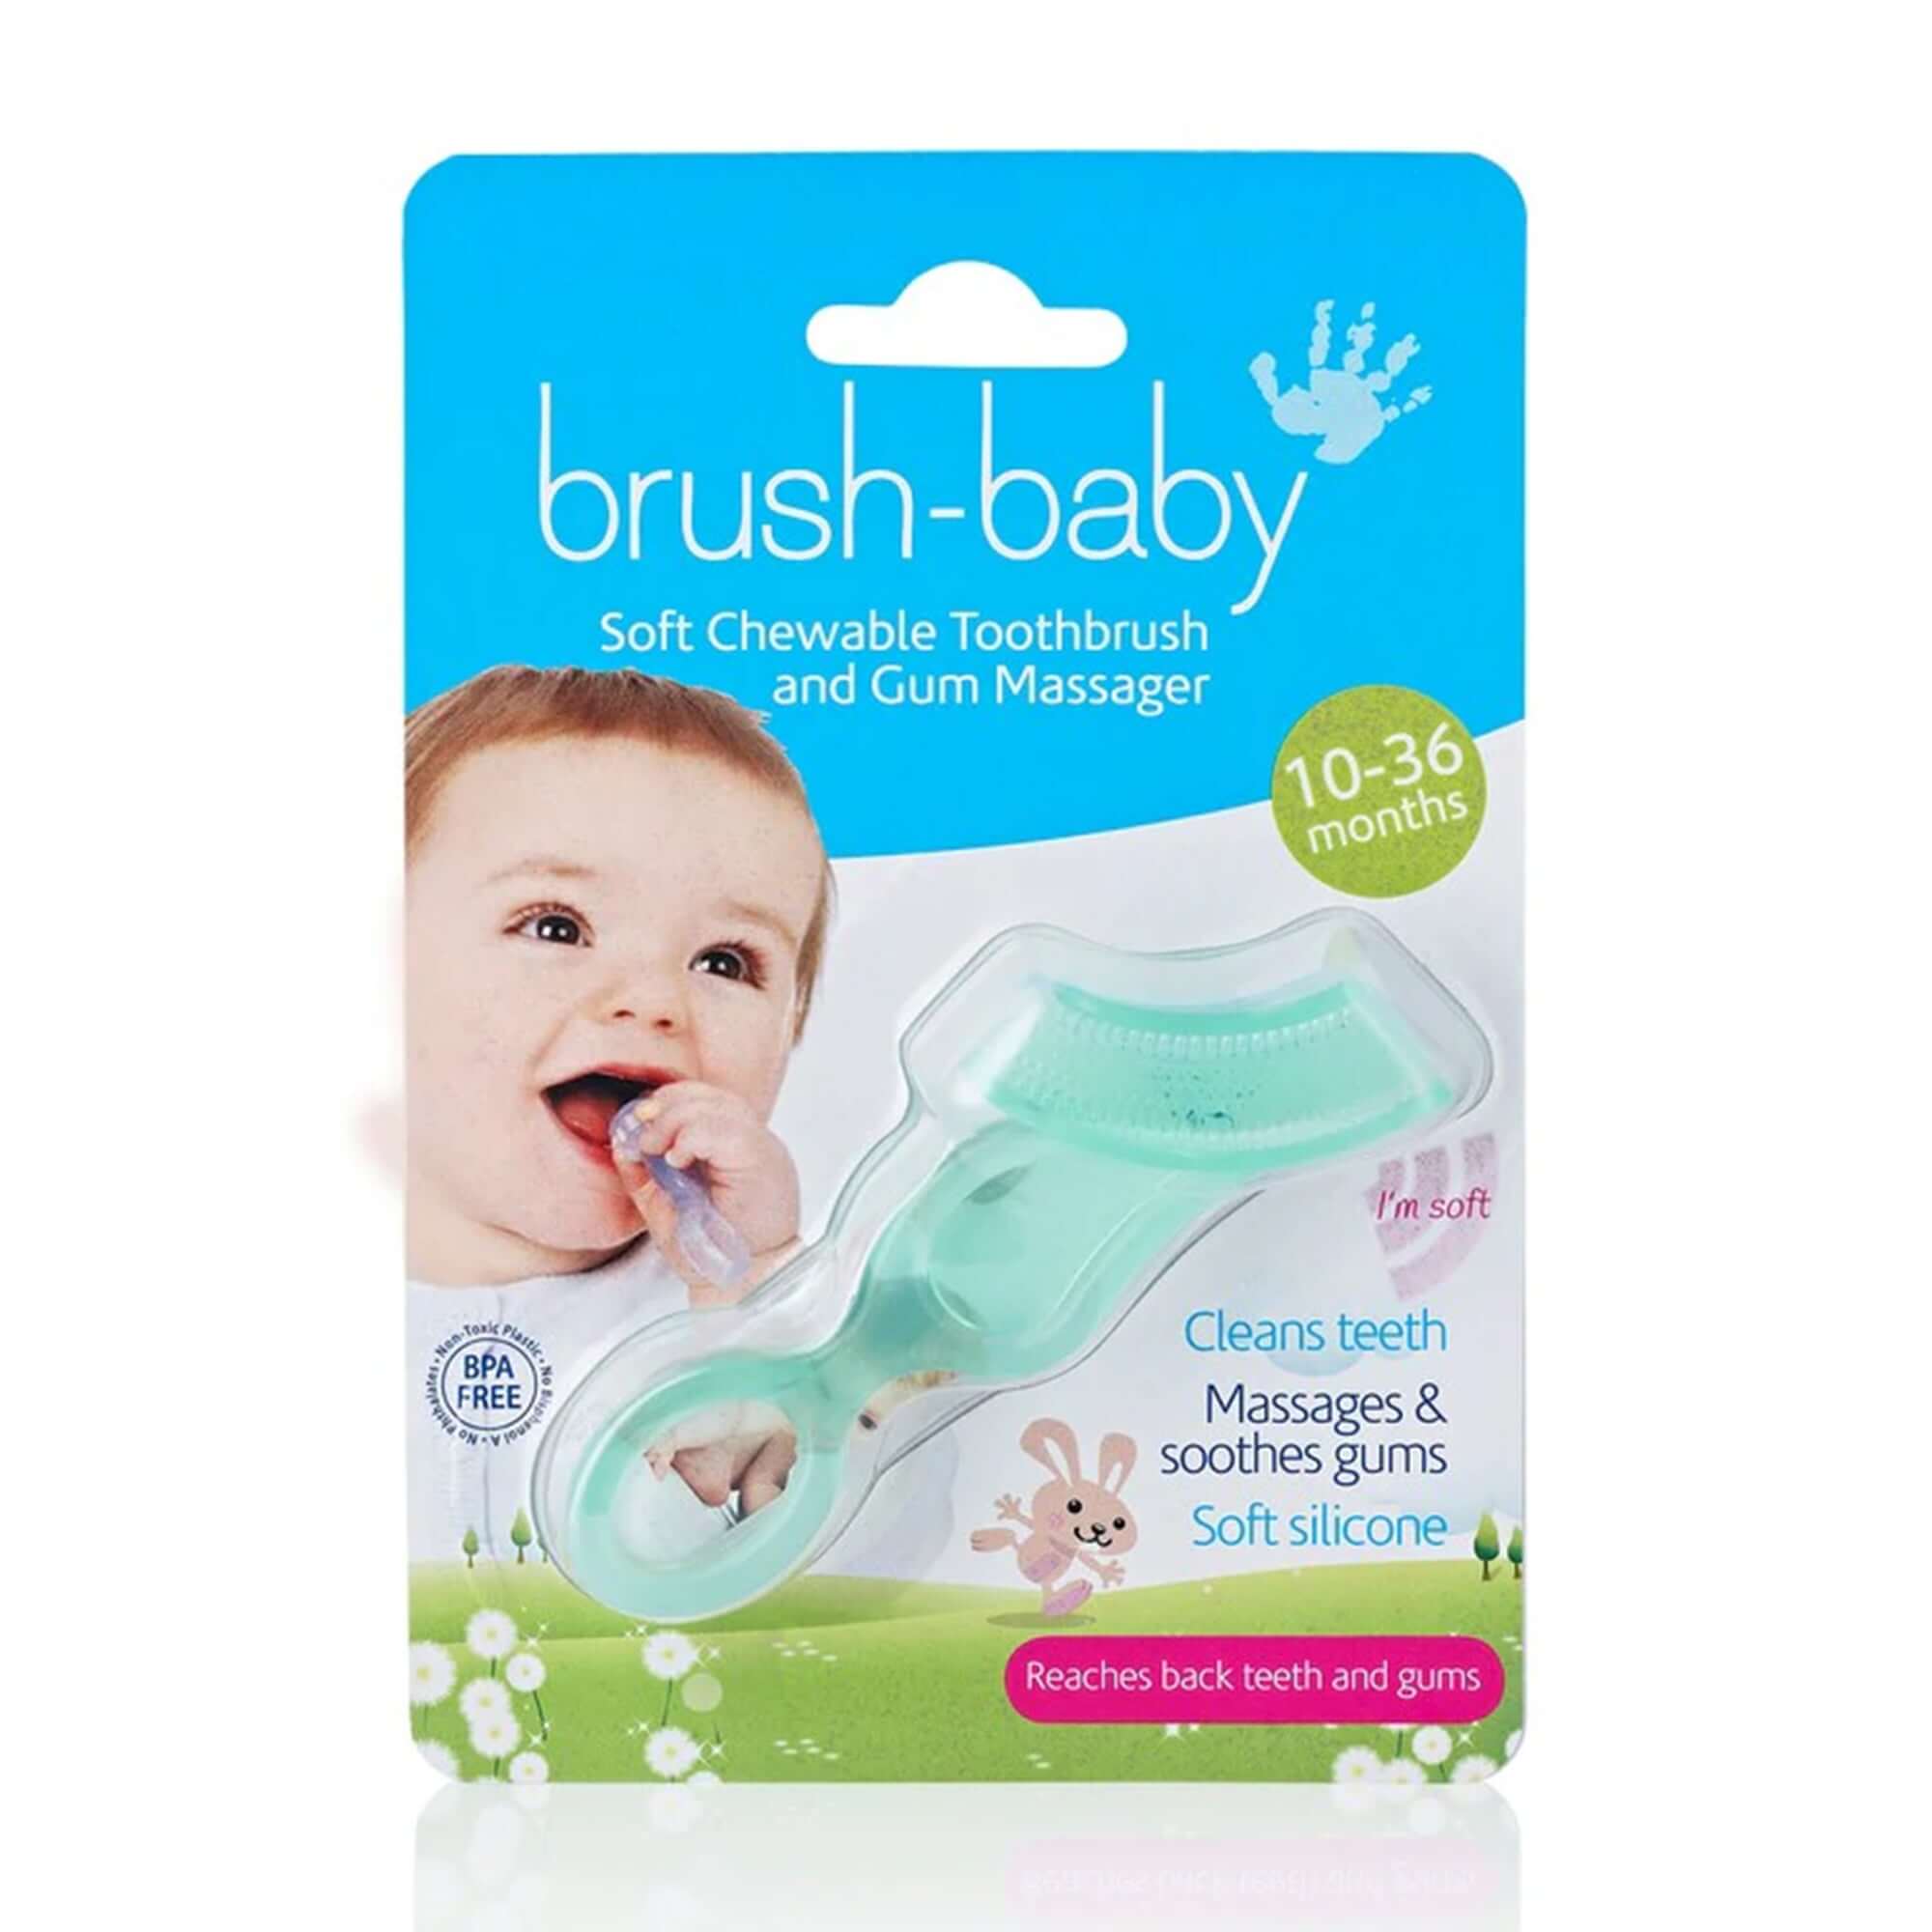 Brush Baby Teal Color New Chewable Toothbrush || 4months to 12months - Toys4All.in